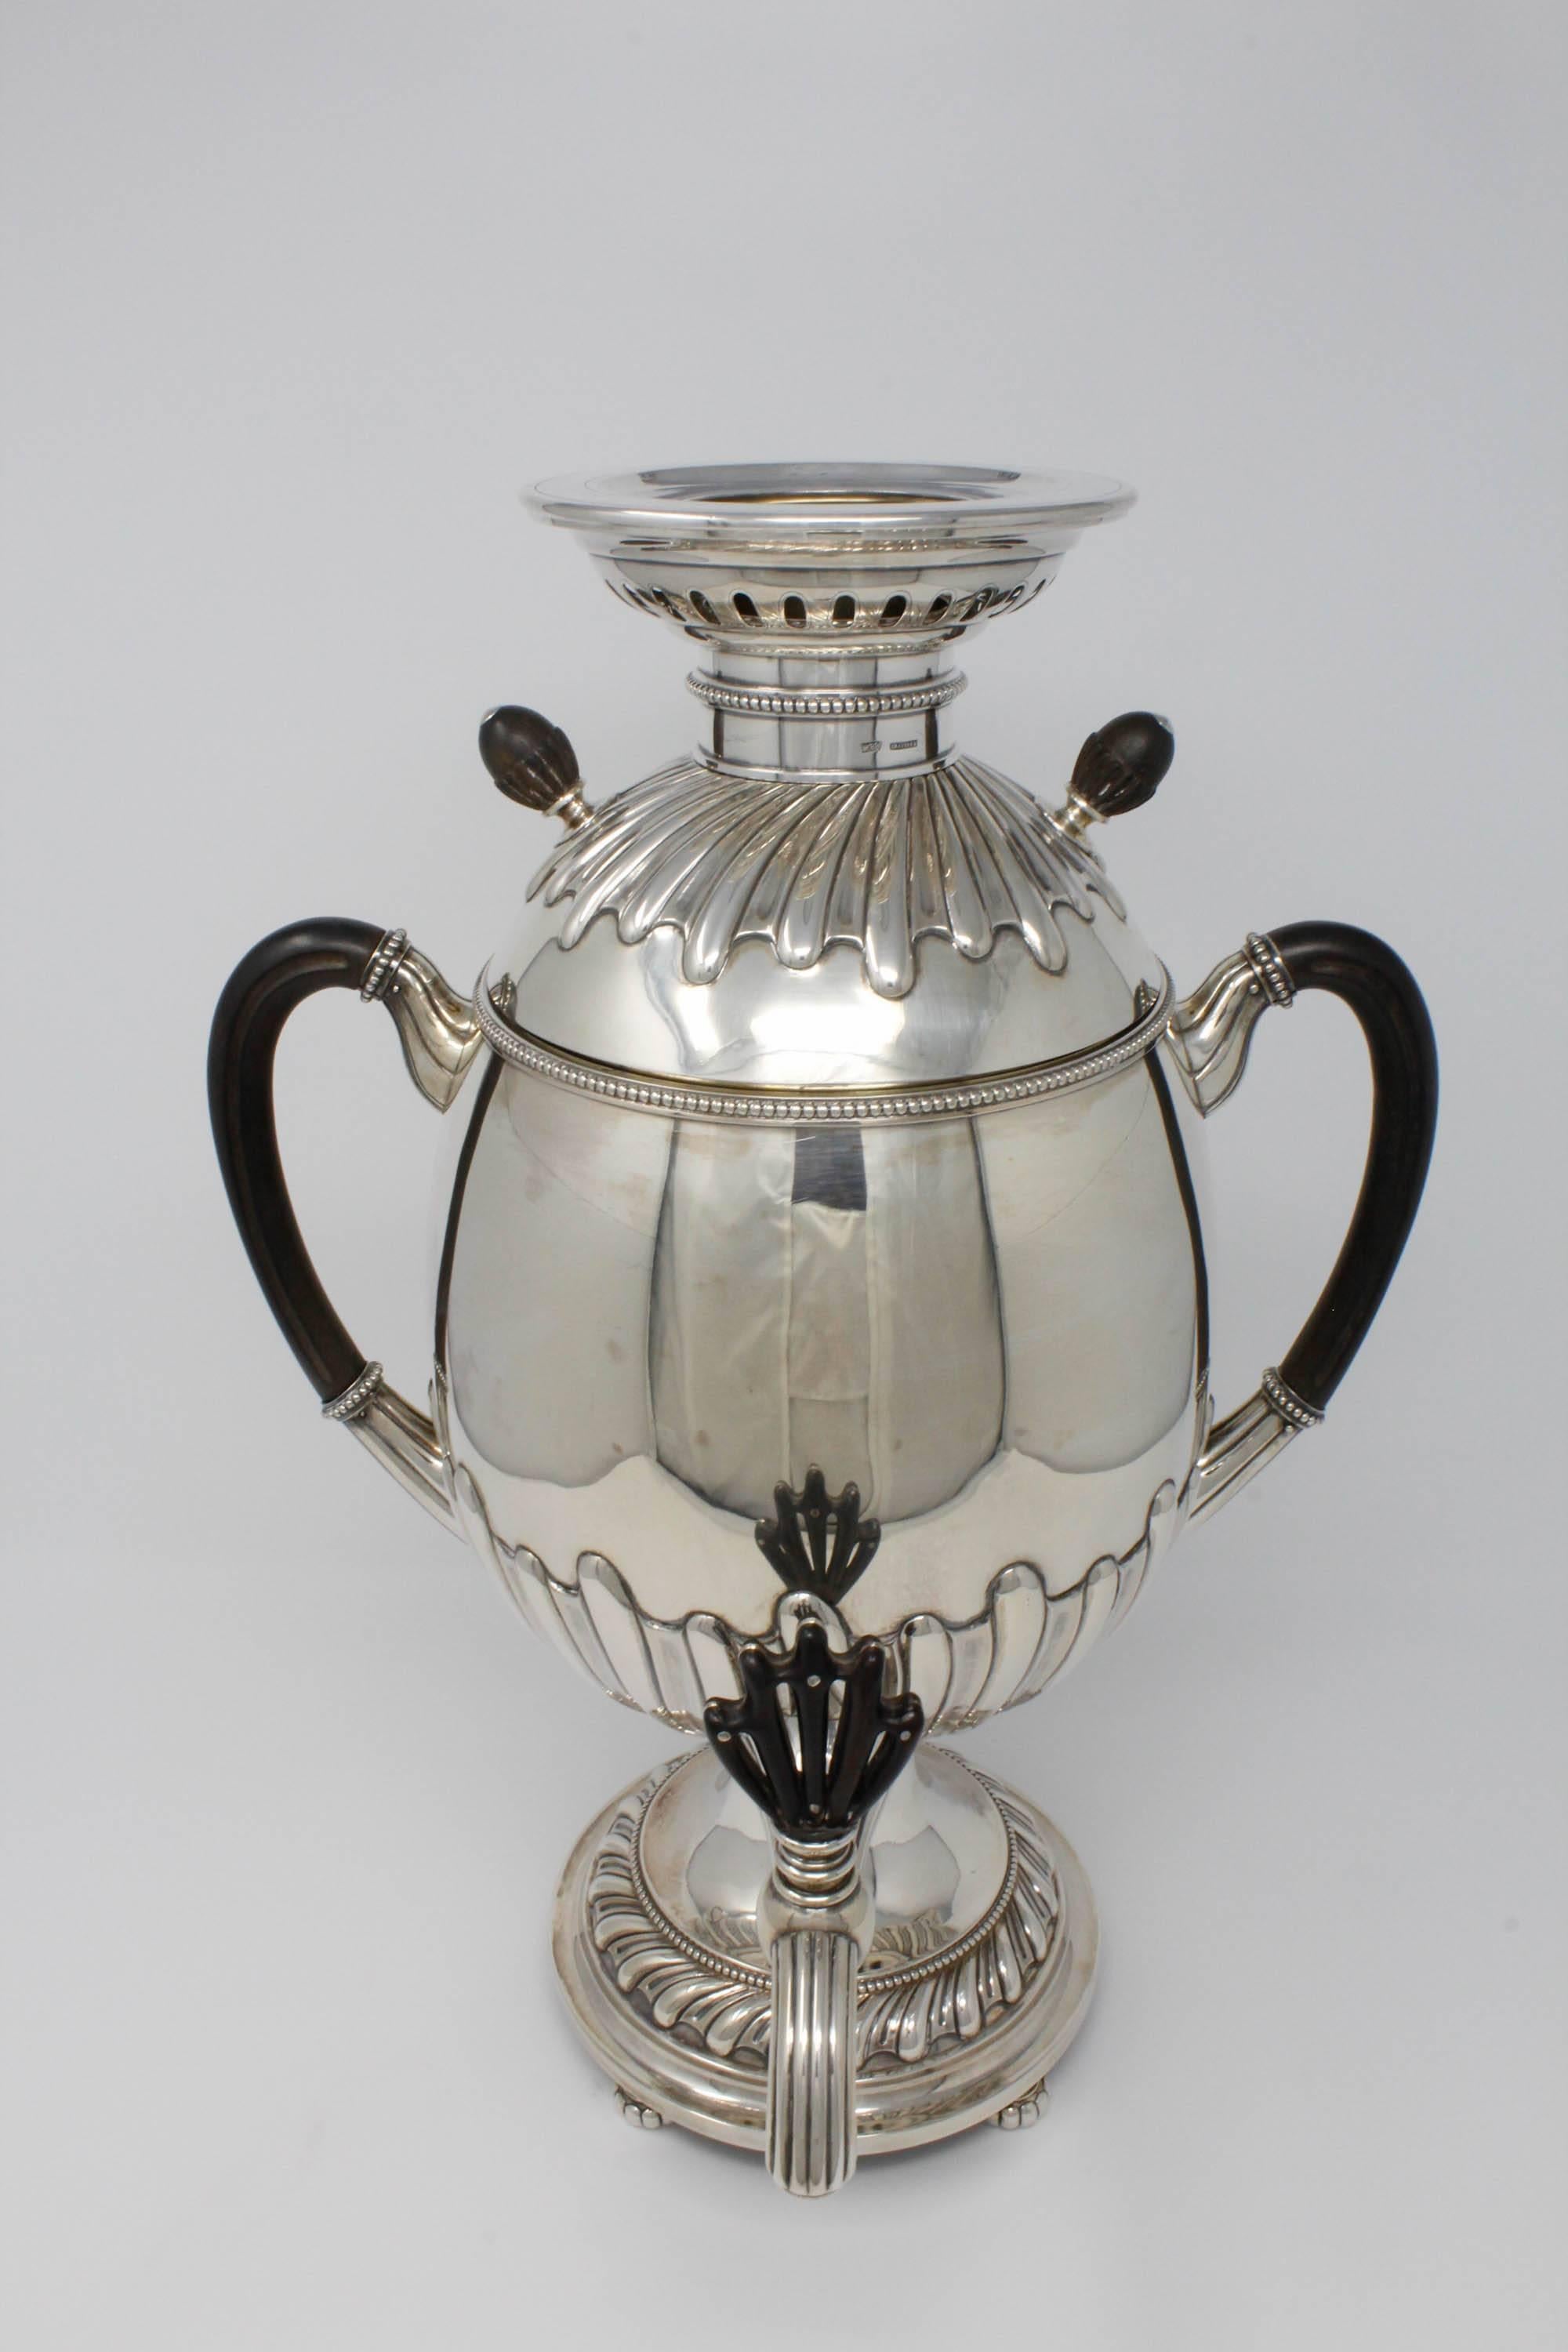 Russian Egg Shaped Samovar with Ebonized Wood Handles, Sterling Silver with Gilded Interior. Samovar has original wooden handles, knobs, finials, and spout. Has bun feet and Interior is gilded. 88 zolotziks= 916.6 Silver. Hallmark is clear, but date